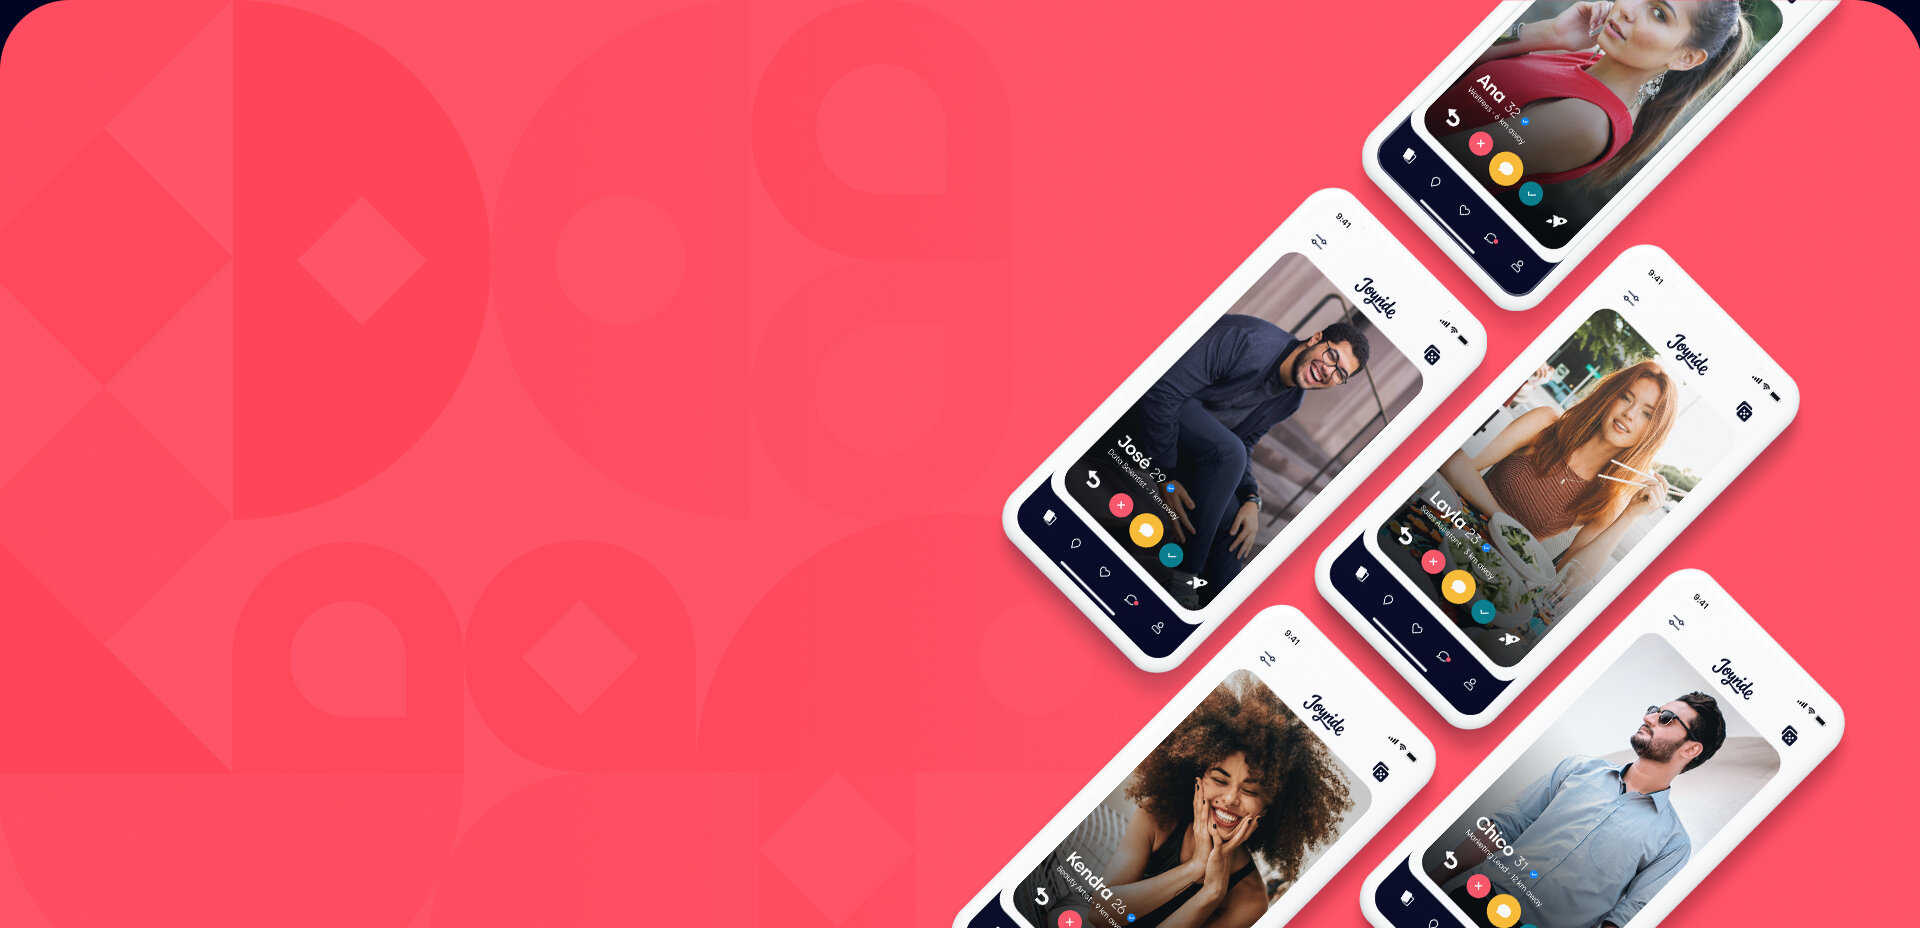 The 10 Best Dating Sites of 2019